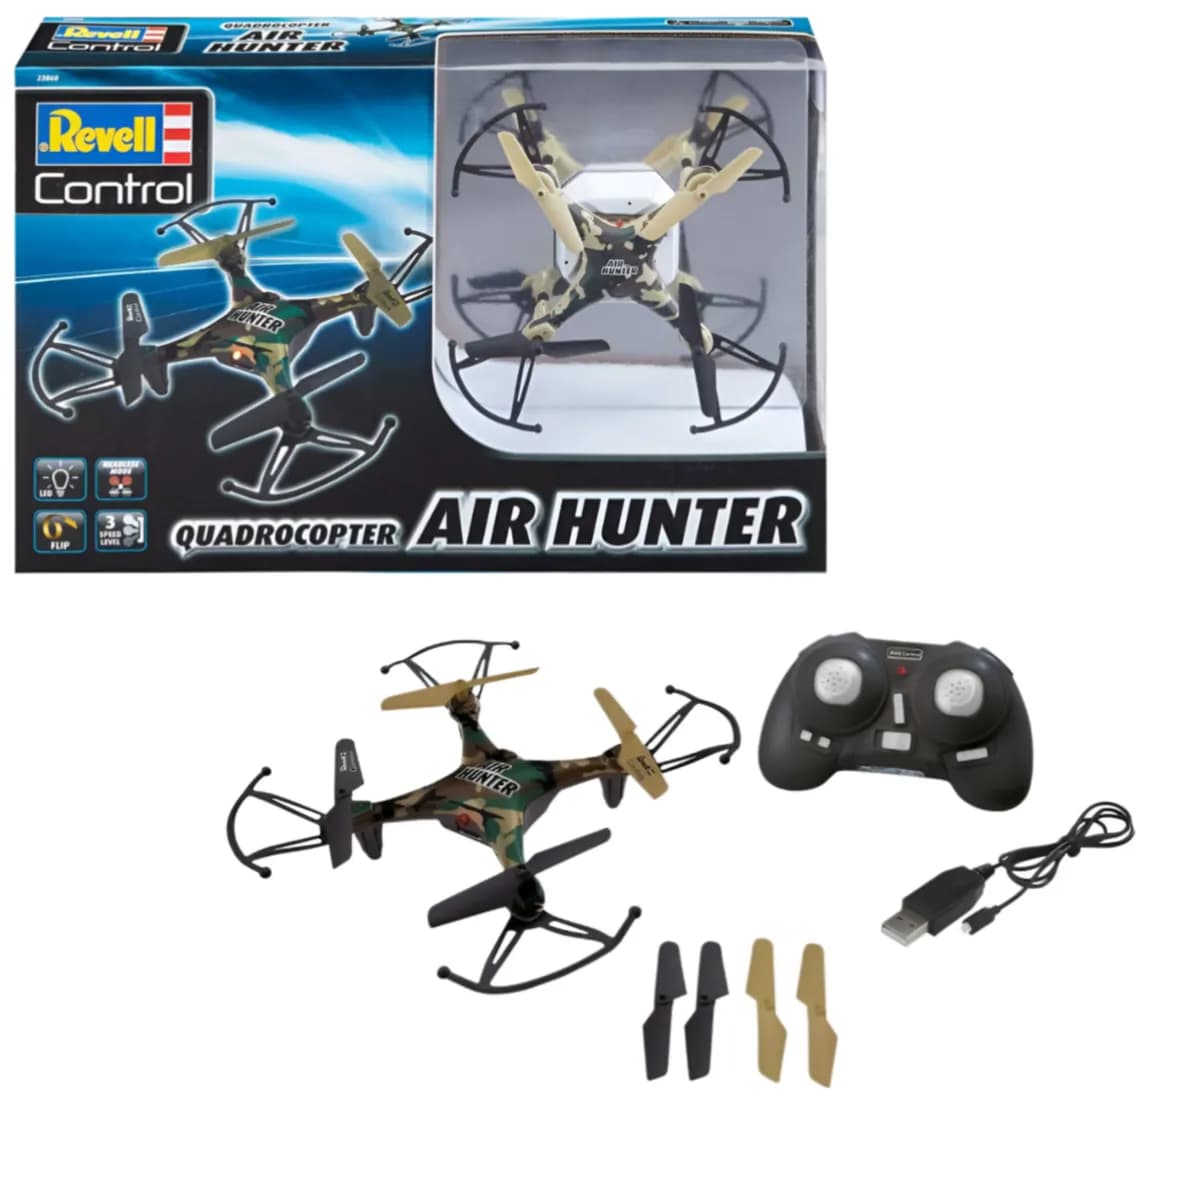 Revell Control RC Quadcopter Air Hunter 2.4ghz Aircraft Drone Toy For Kids - (DEFS12)